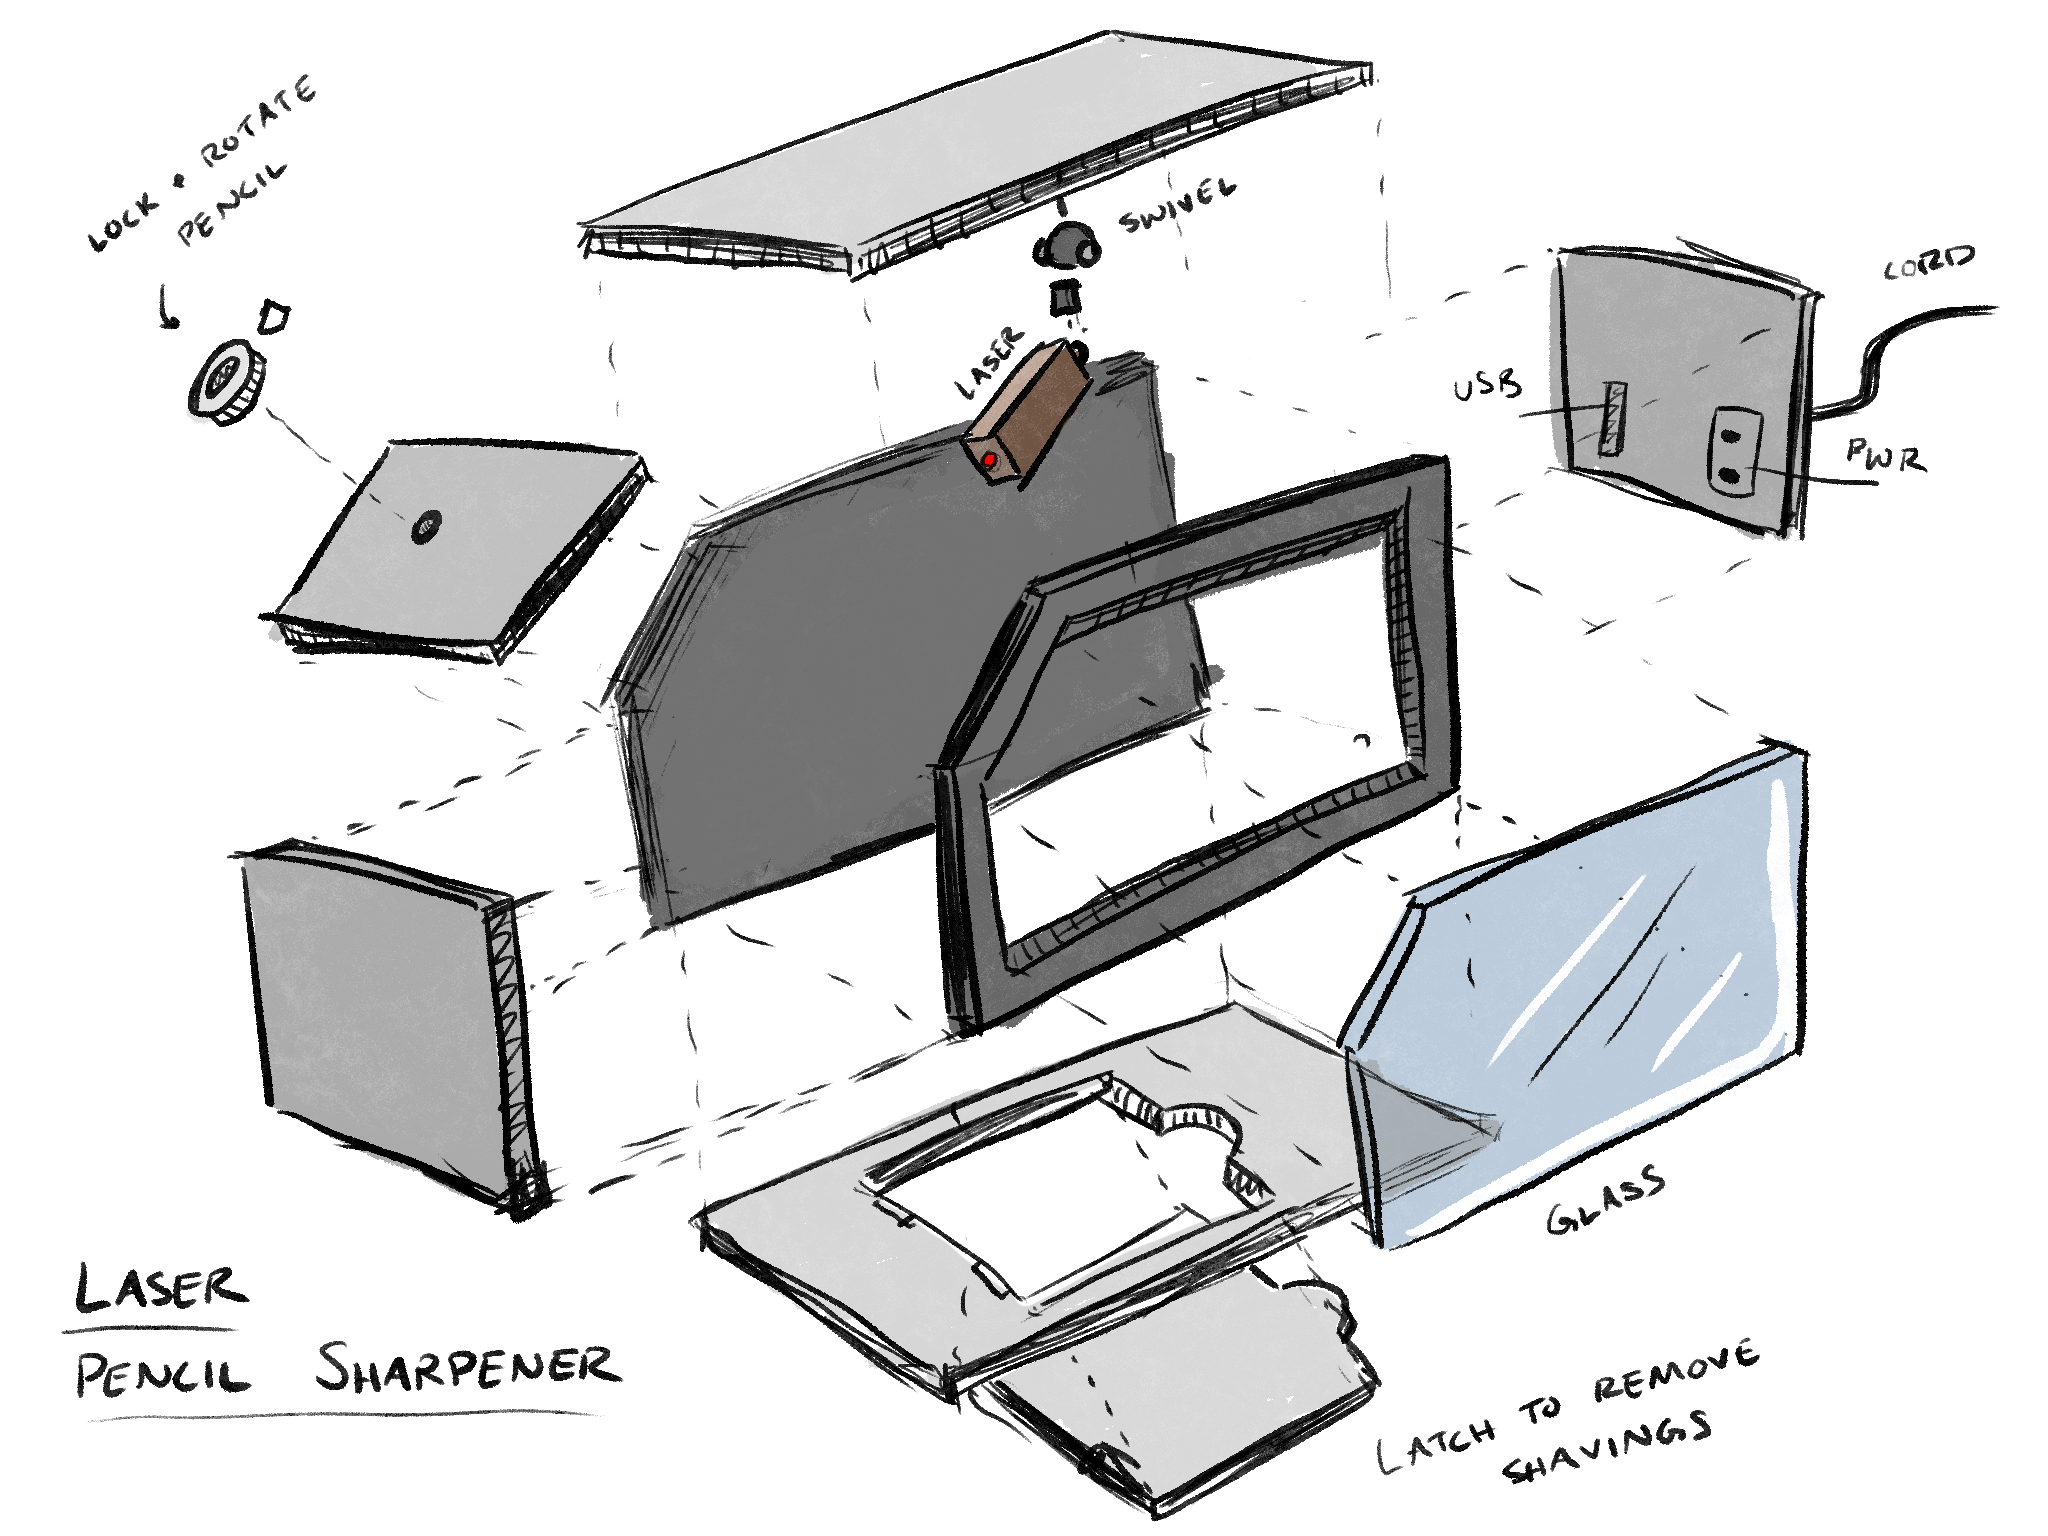 A sketch of the sharpener in a blown-up isometric view.